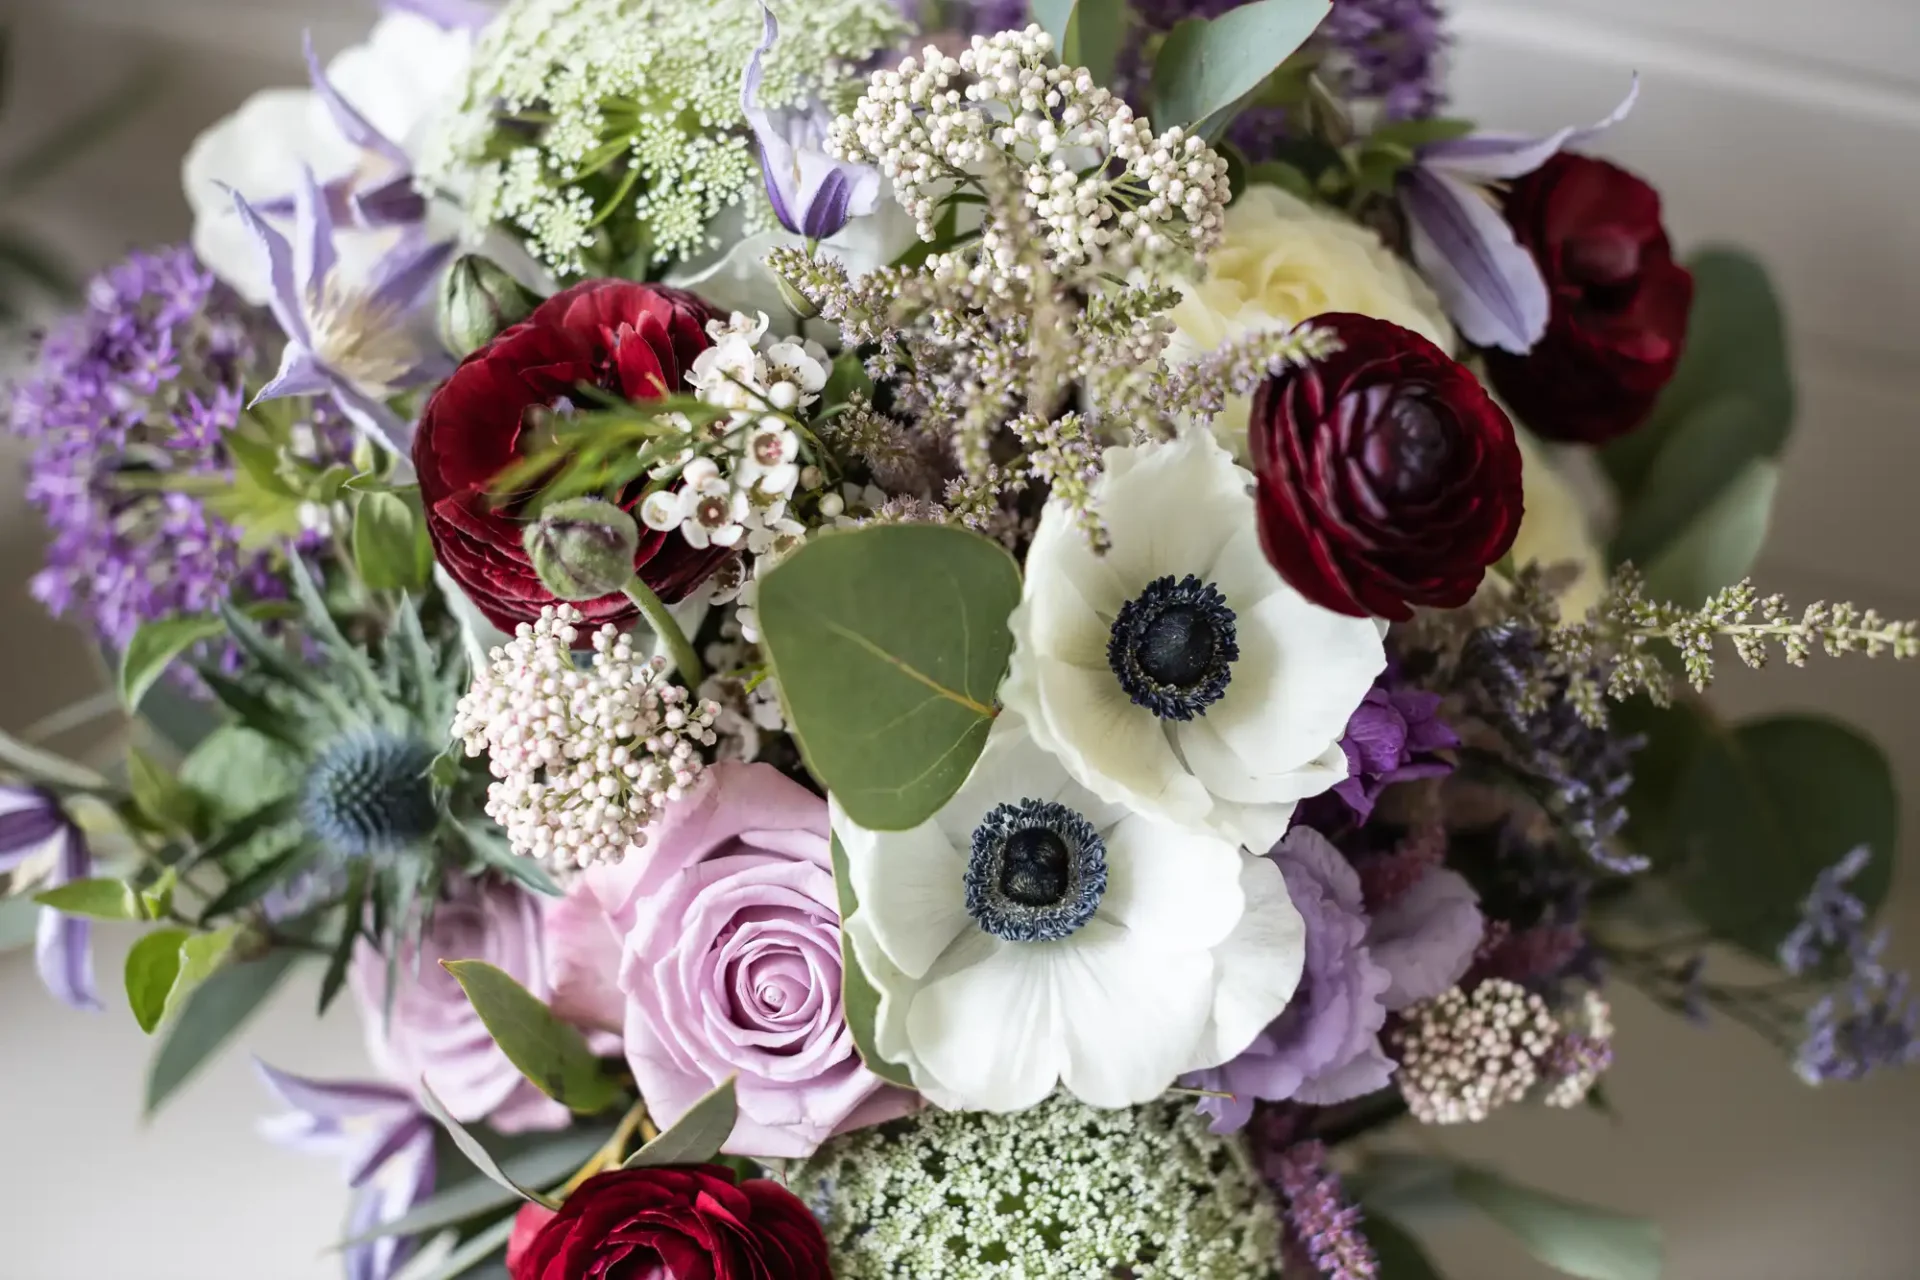 A floral arrangement featuring a mix of white, red, and purple flowers, including roses, anemones, and various greenery.